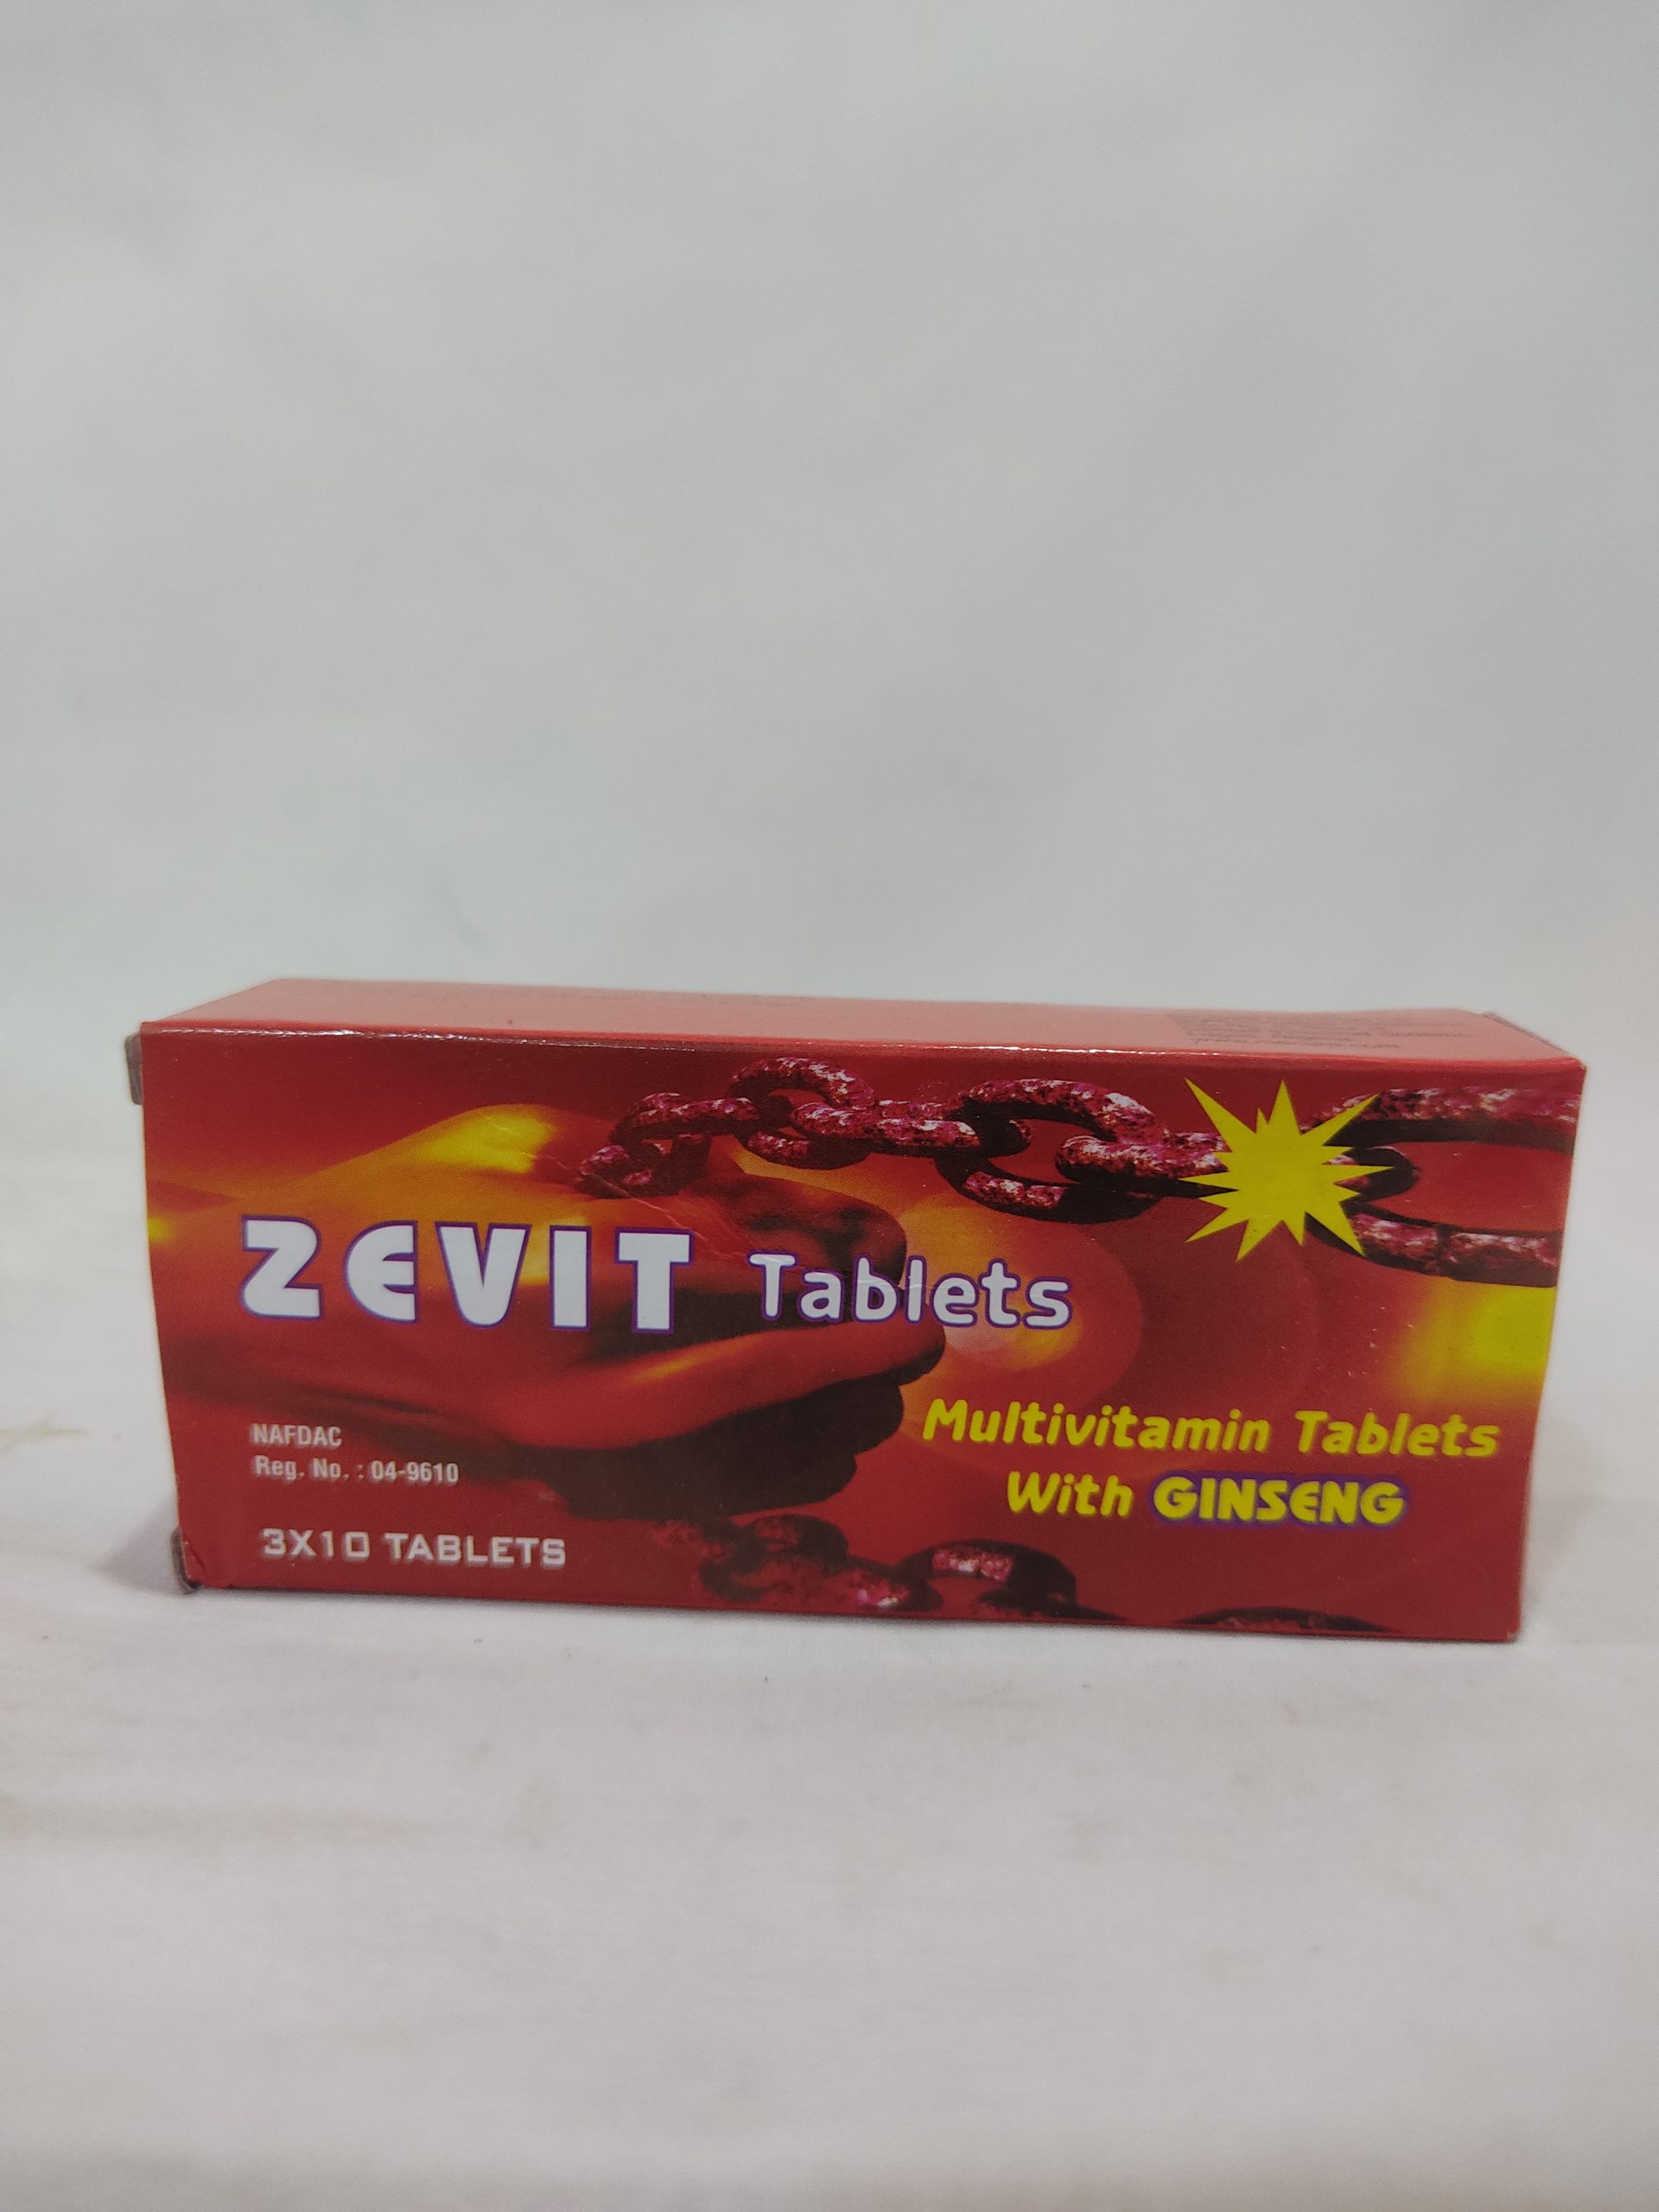 The Benefits of Zevit for Health and Wellness